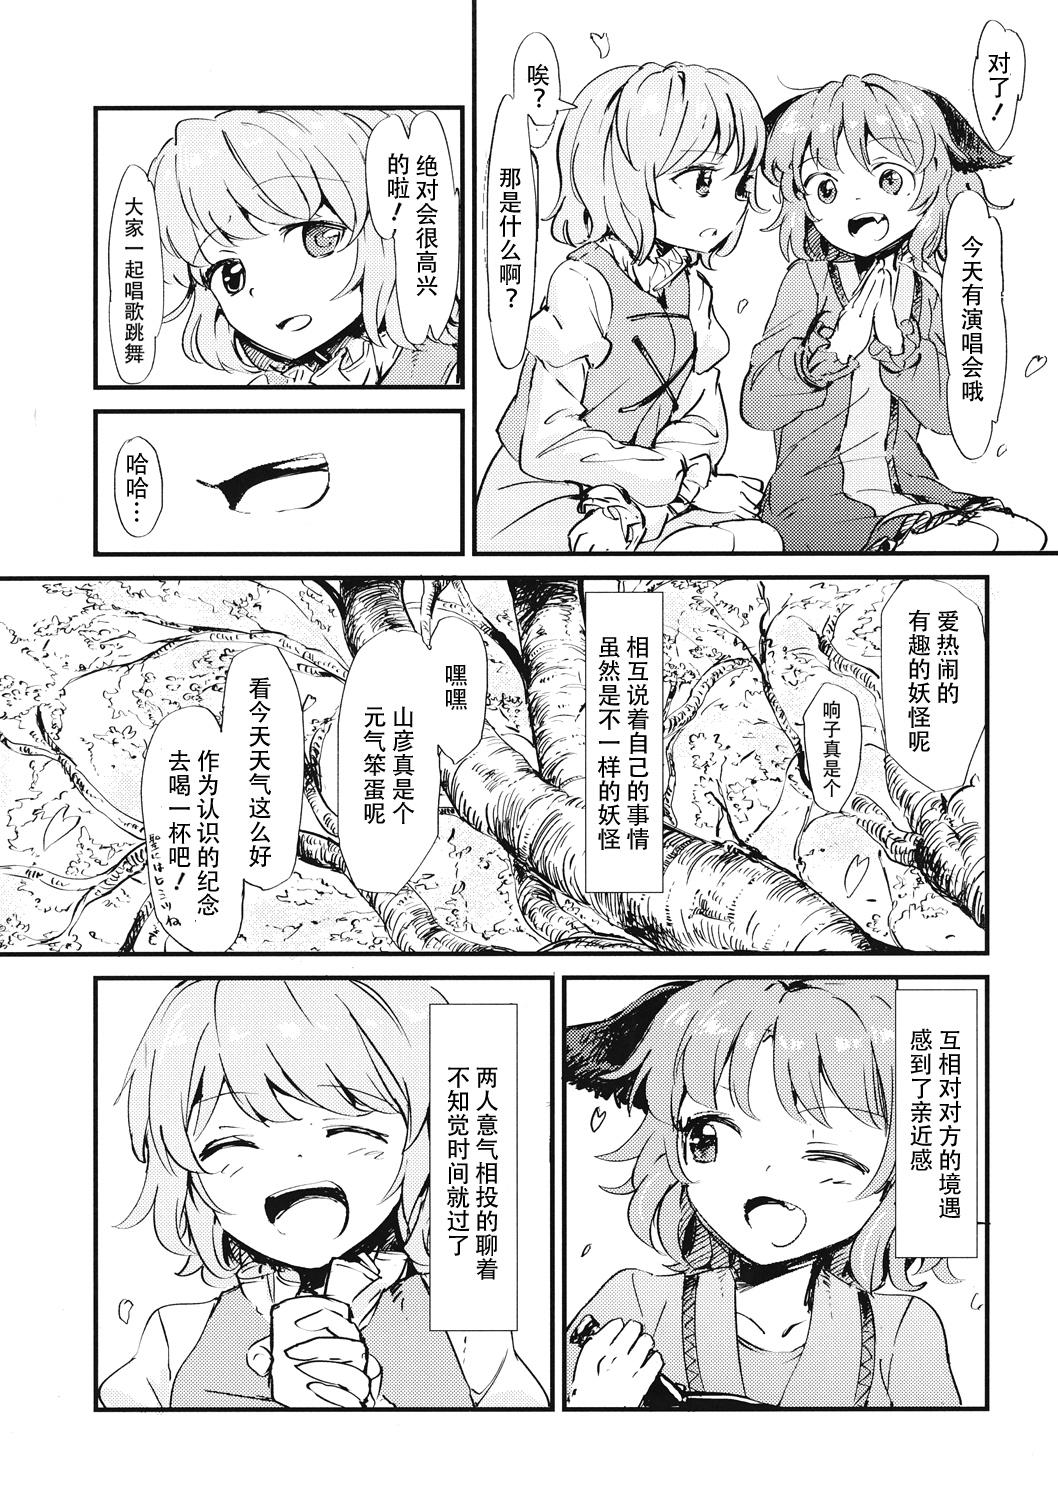 Celebrity Sex Kasa no miren - Touhou project Real - Page 5